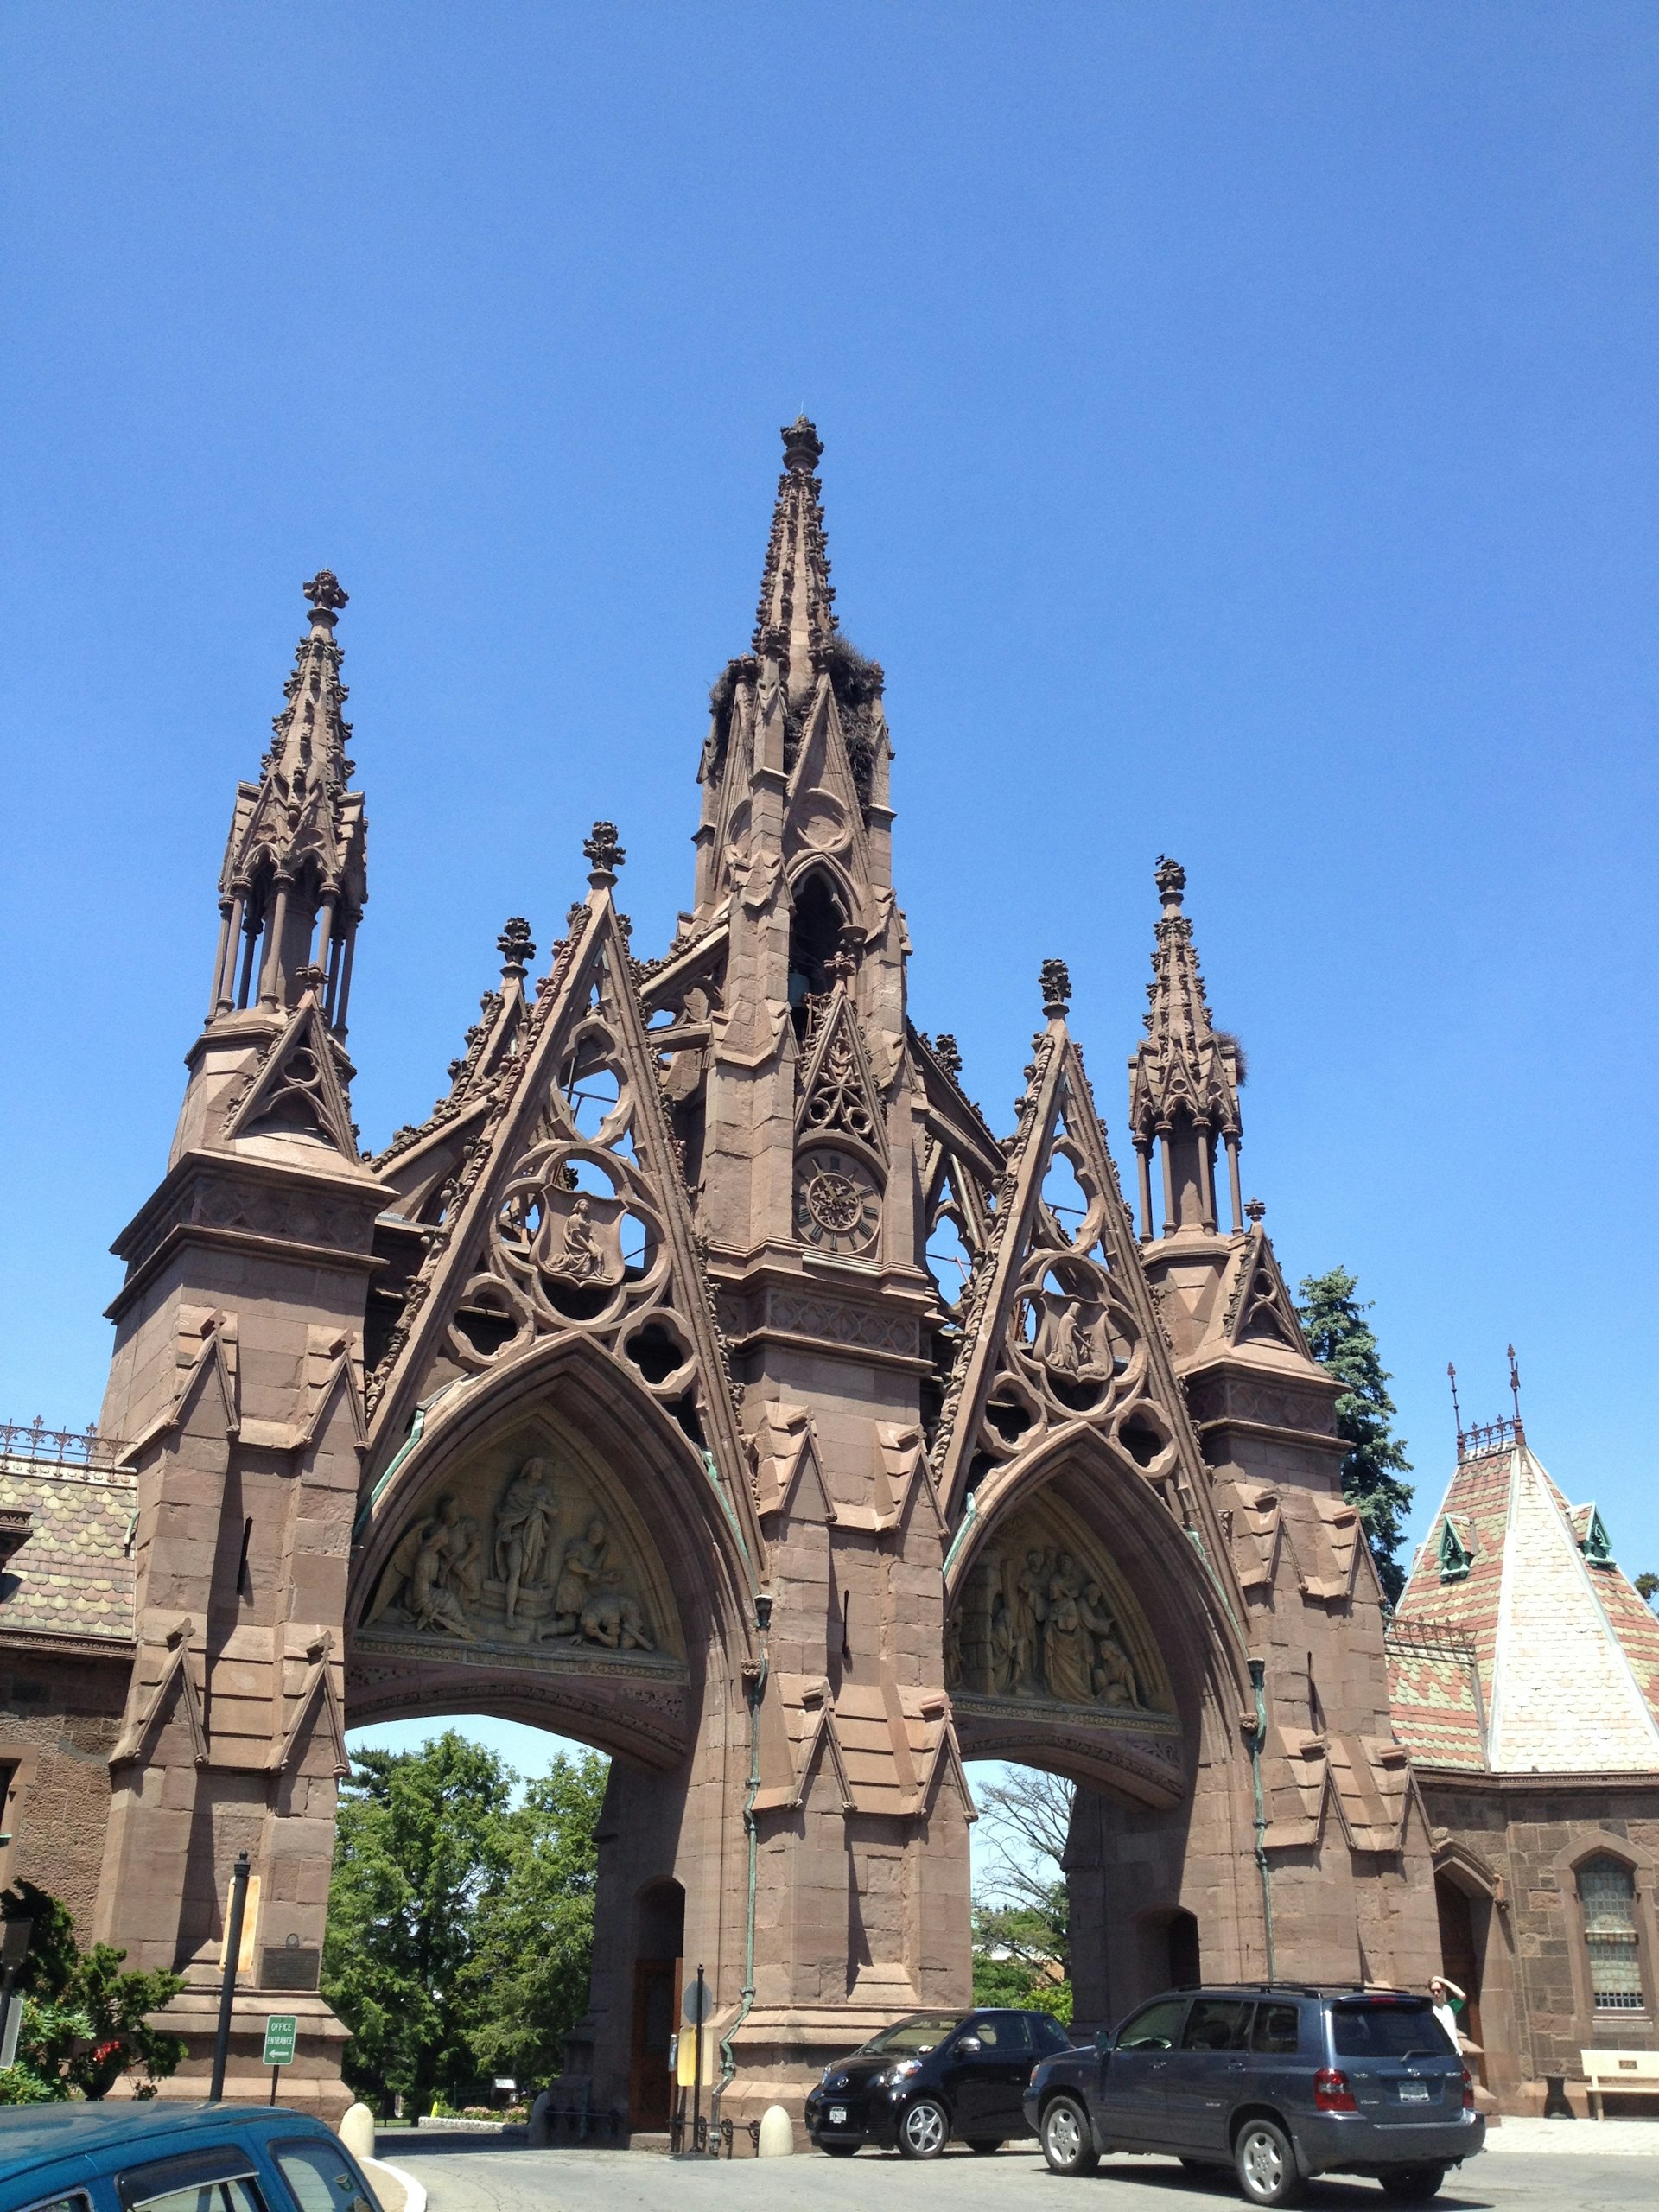 Highly ornate, Gothic-style gateway, with two separate arches to drive under